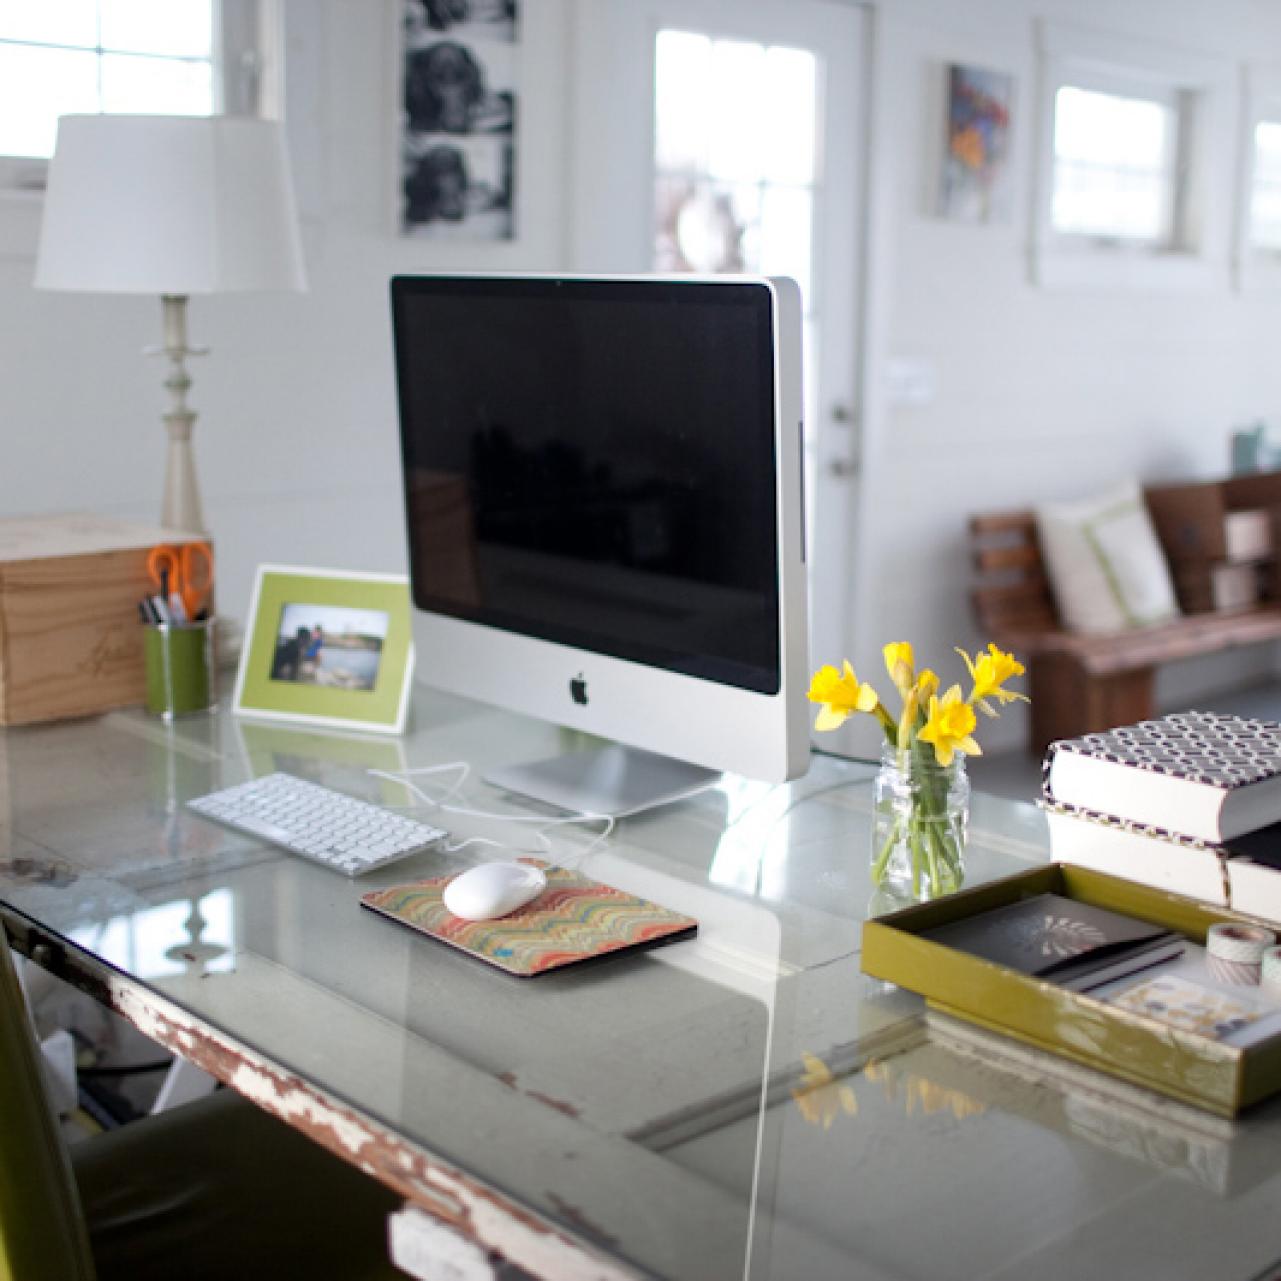 Must-Have Home Office Essentials - The Vintage Modern Wife